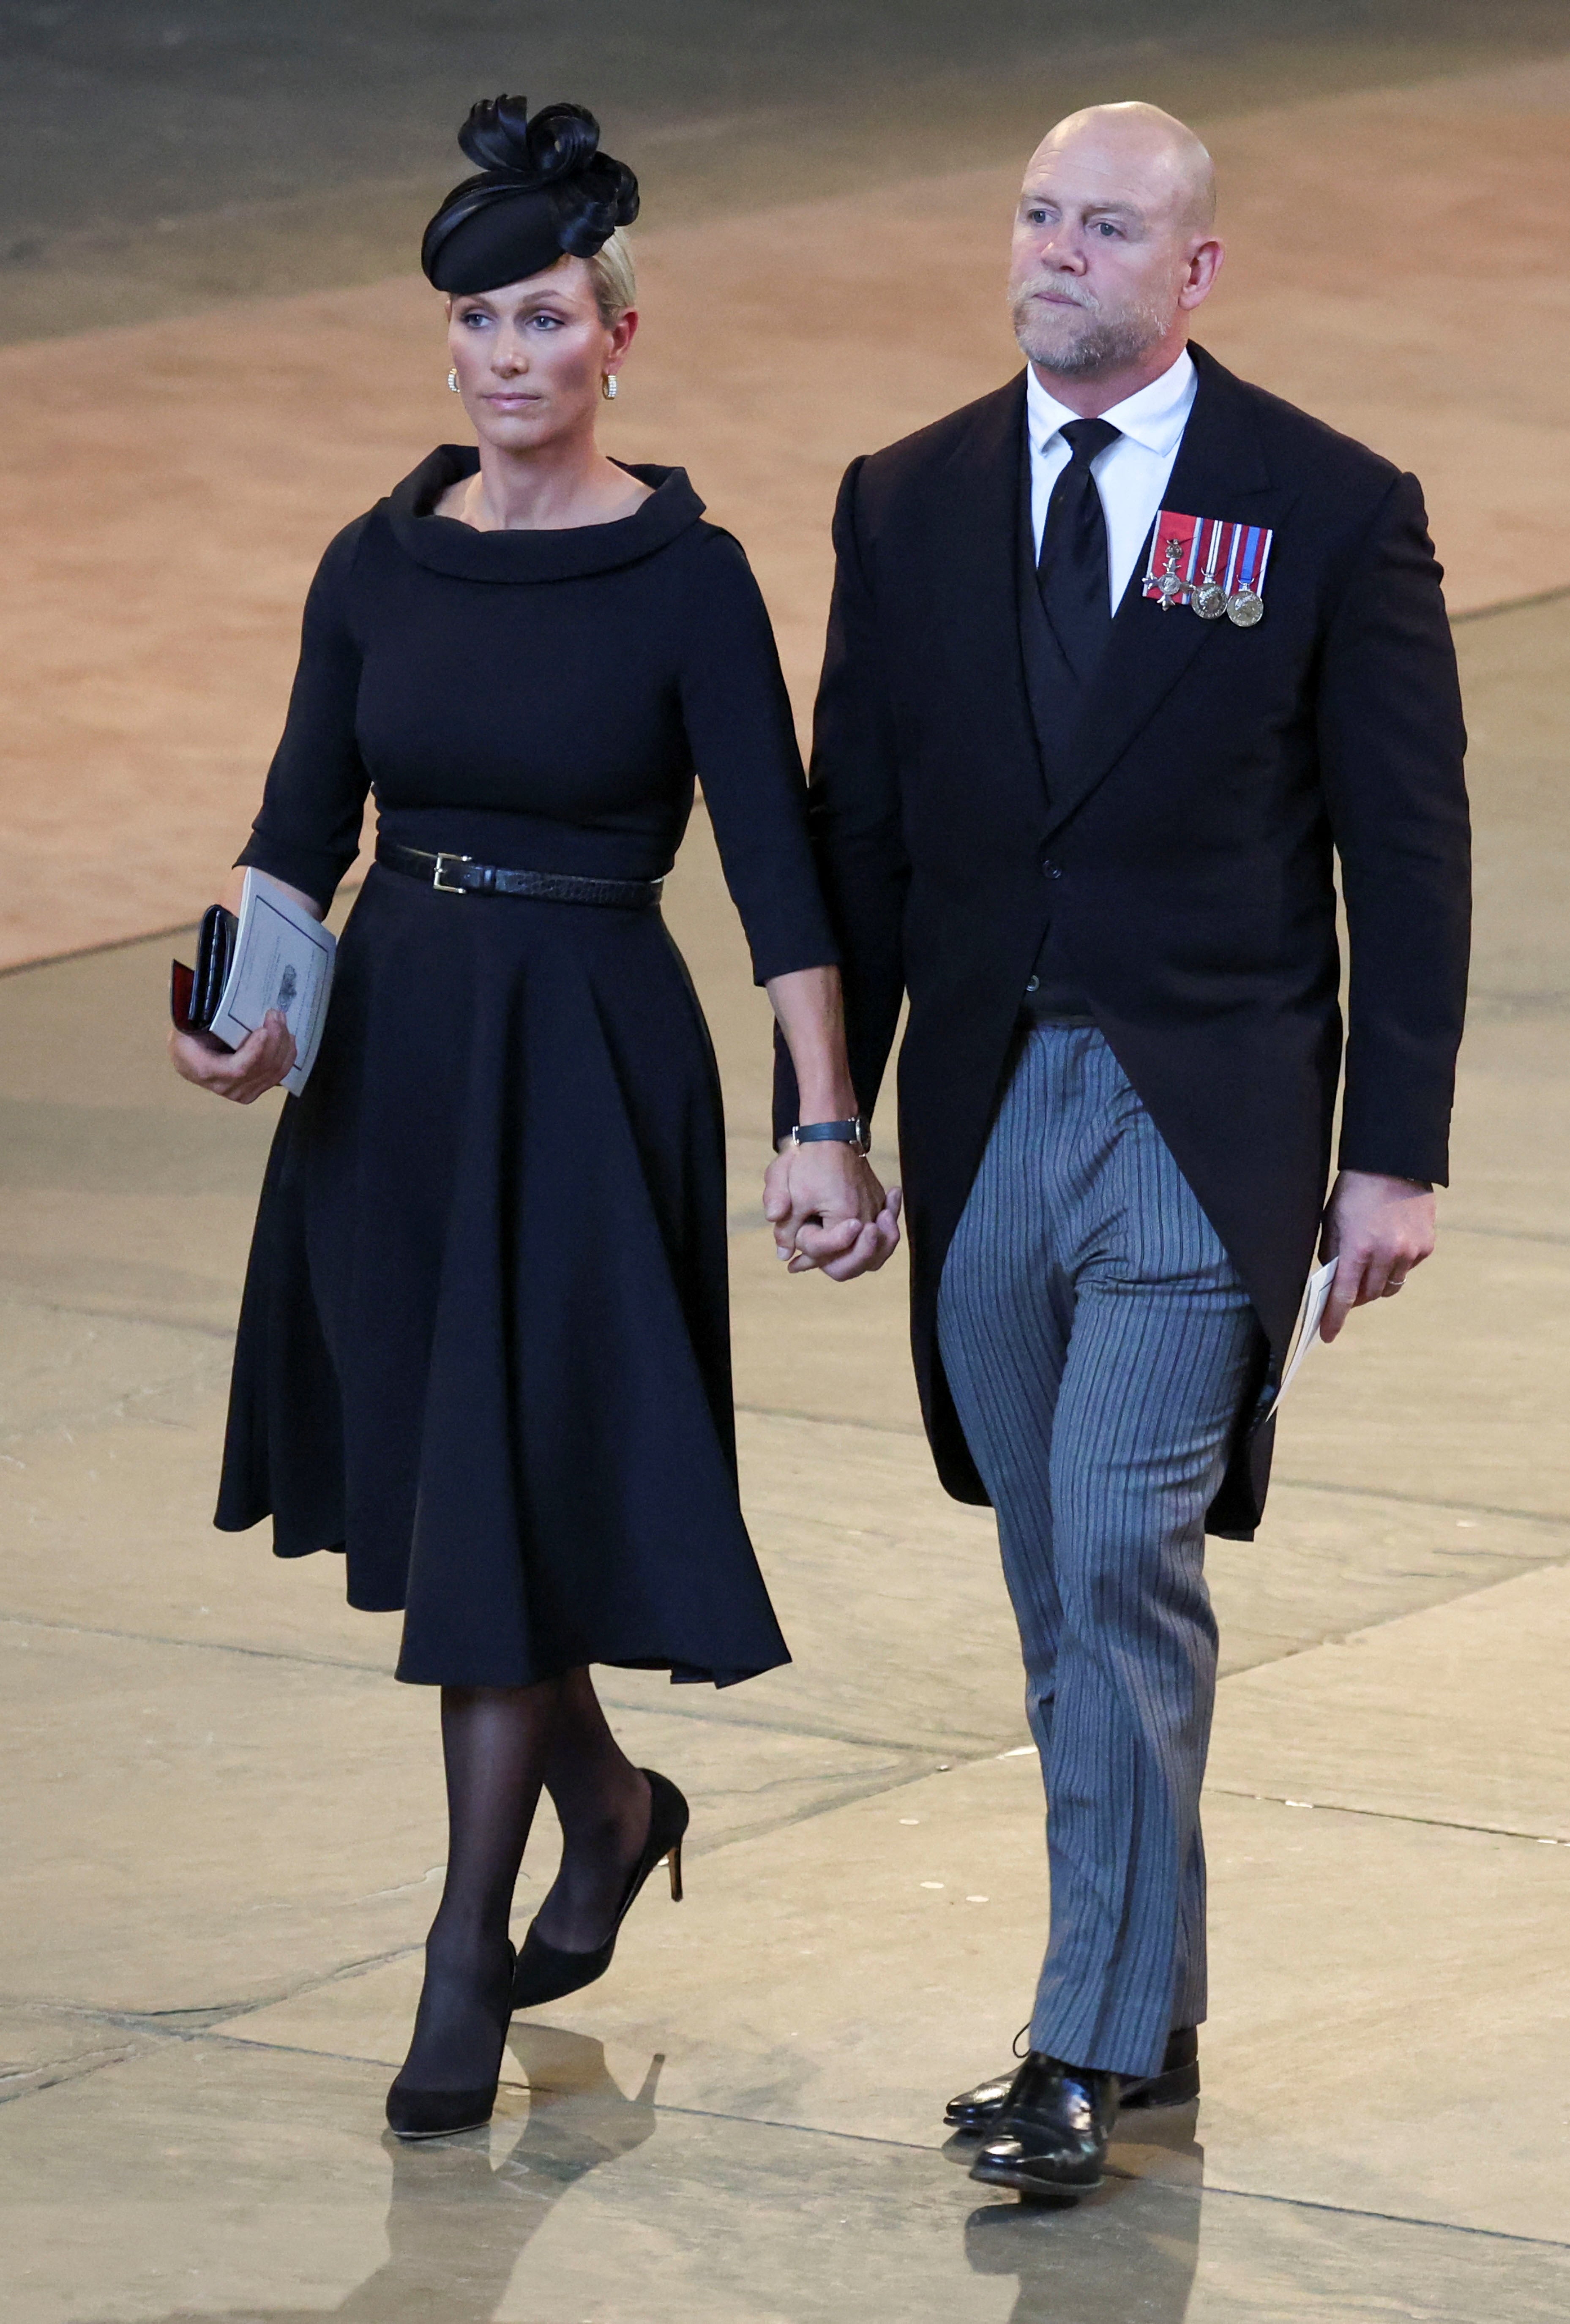 Zara Tindall and her husband Mike also held hands